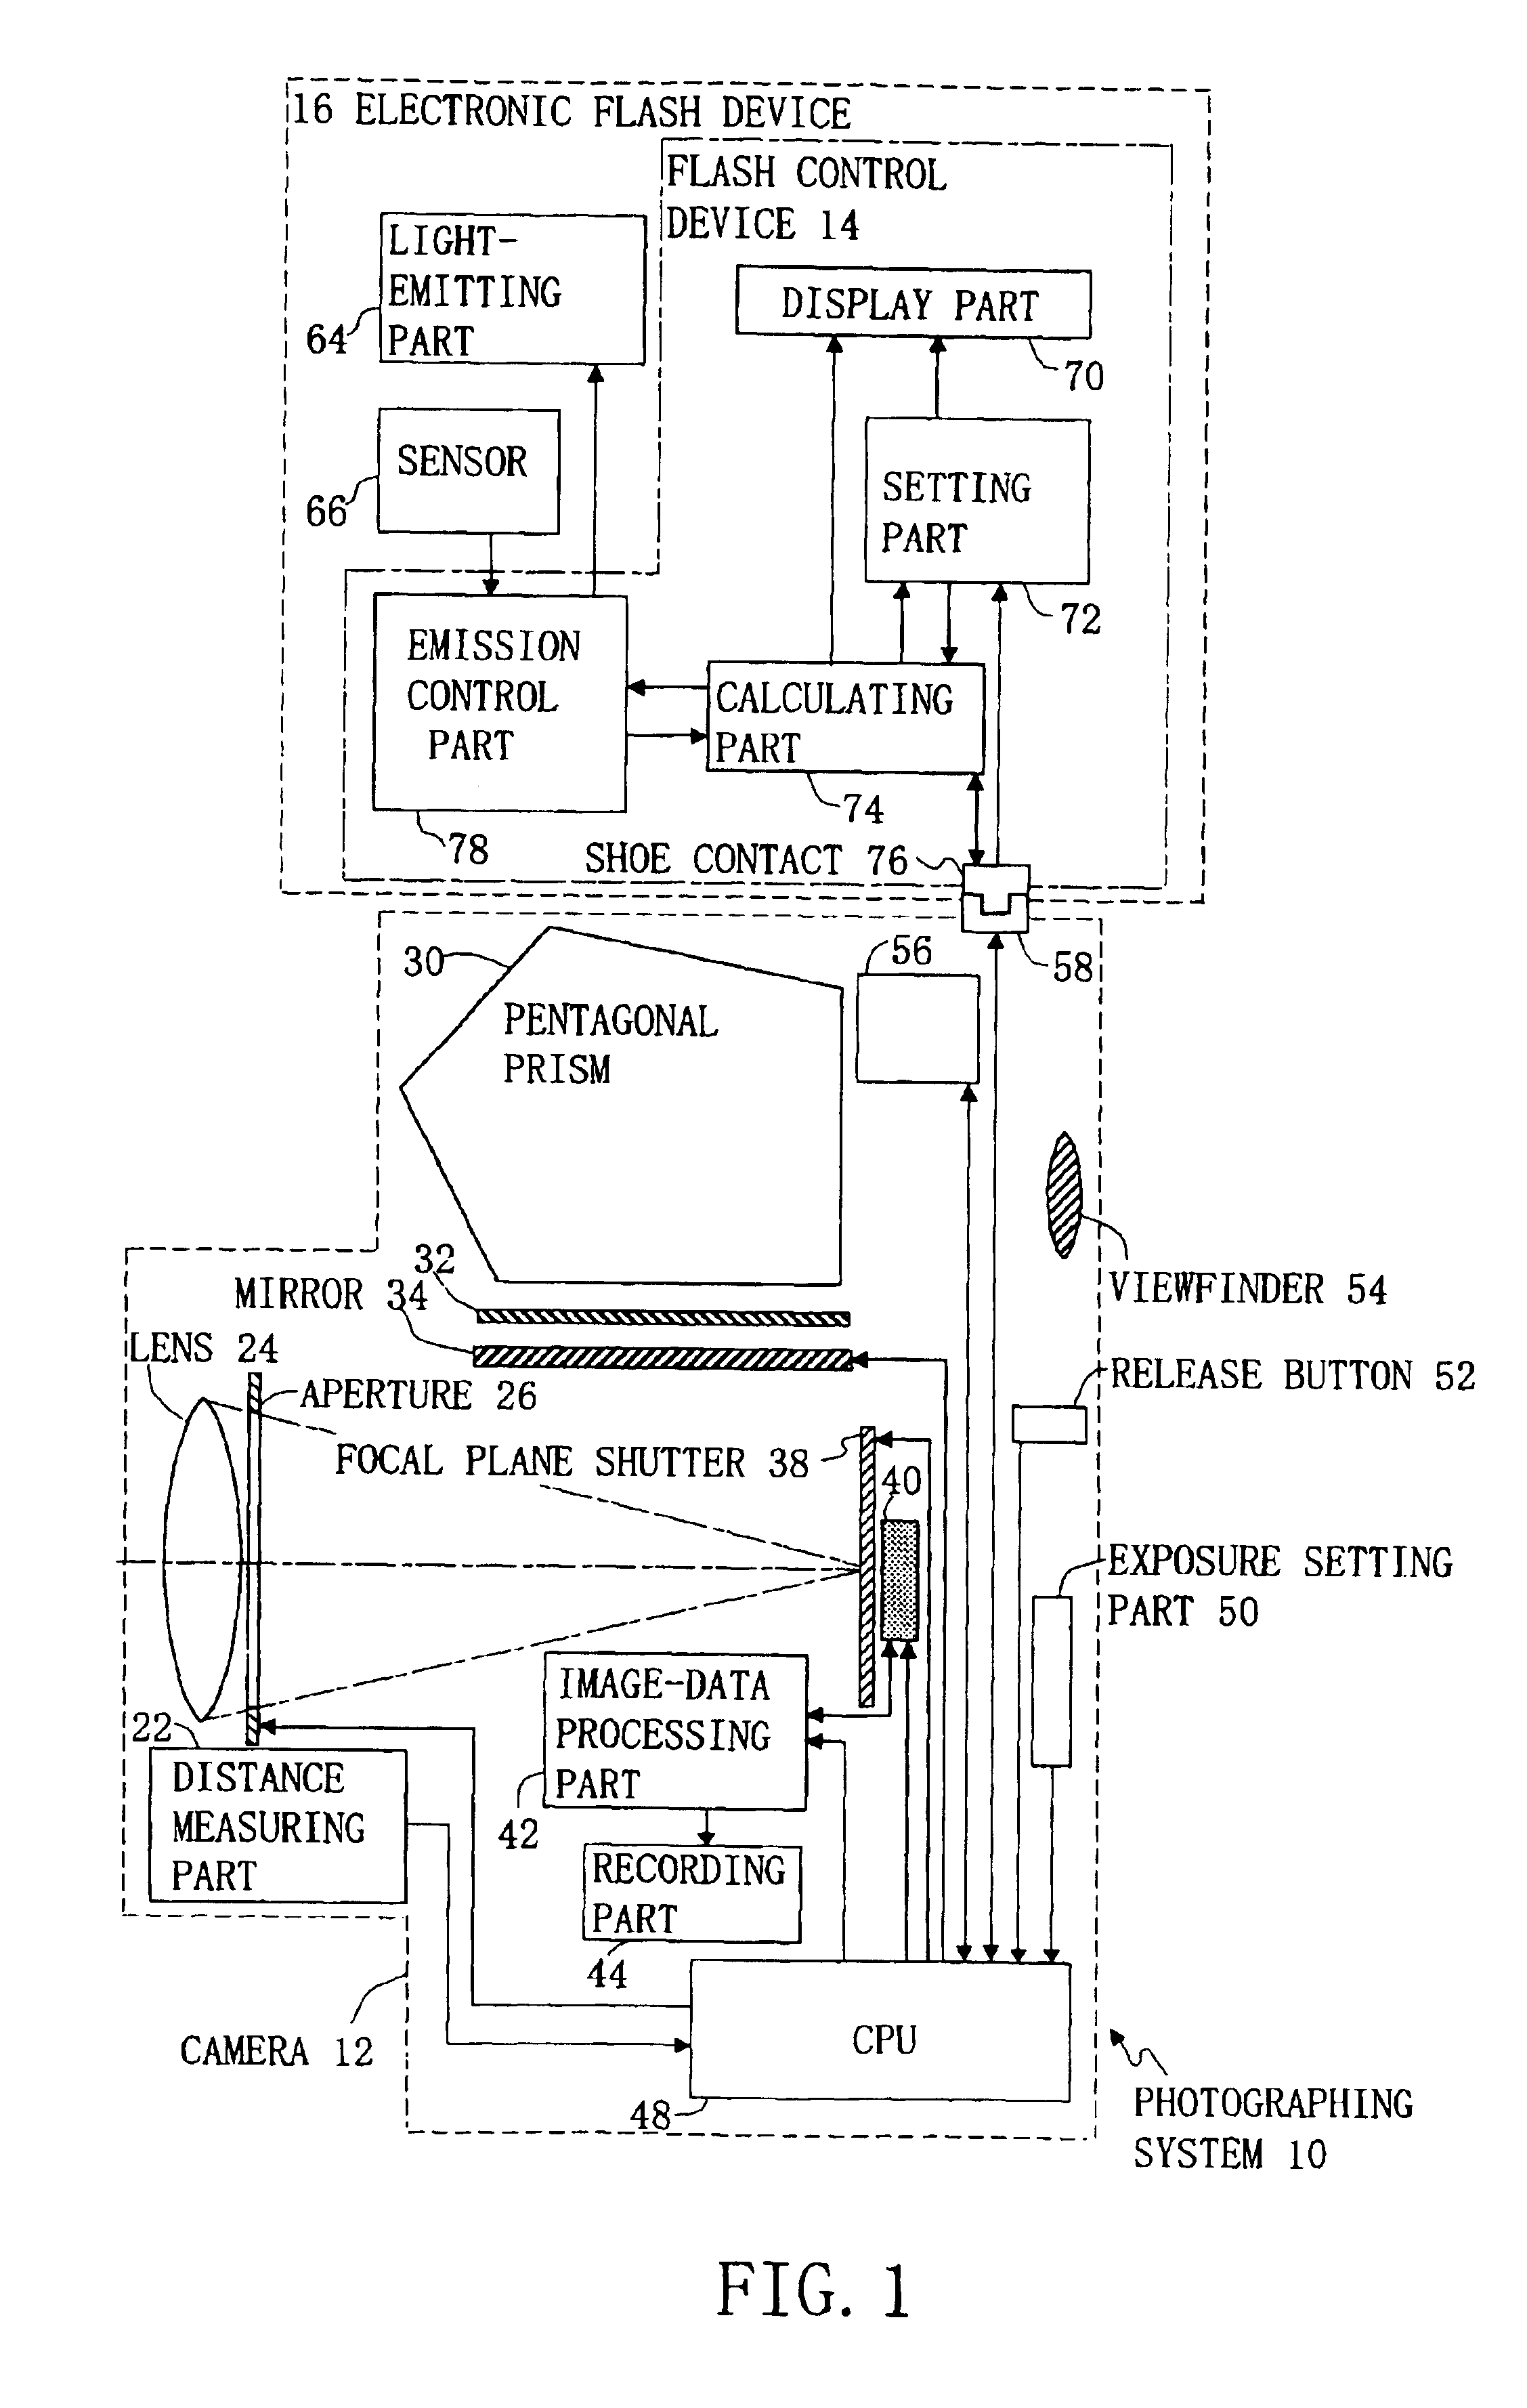 Flash control device, electronic flash device, and photographing system